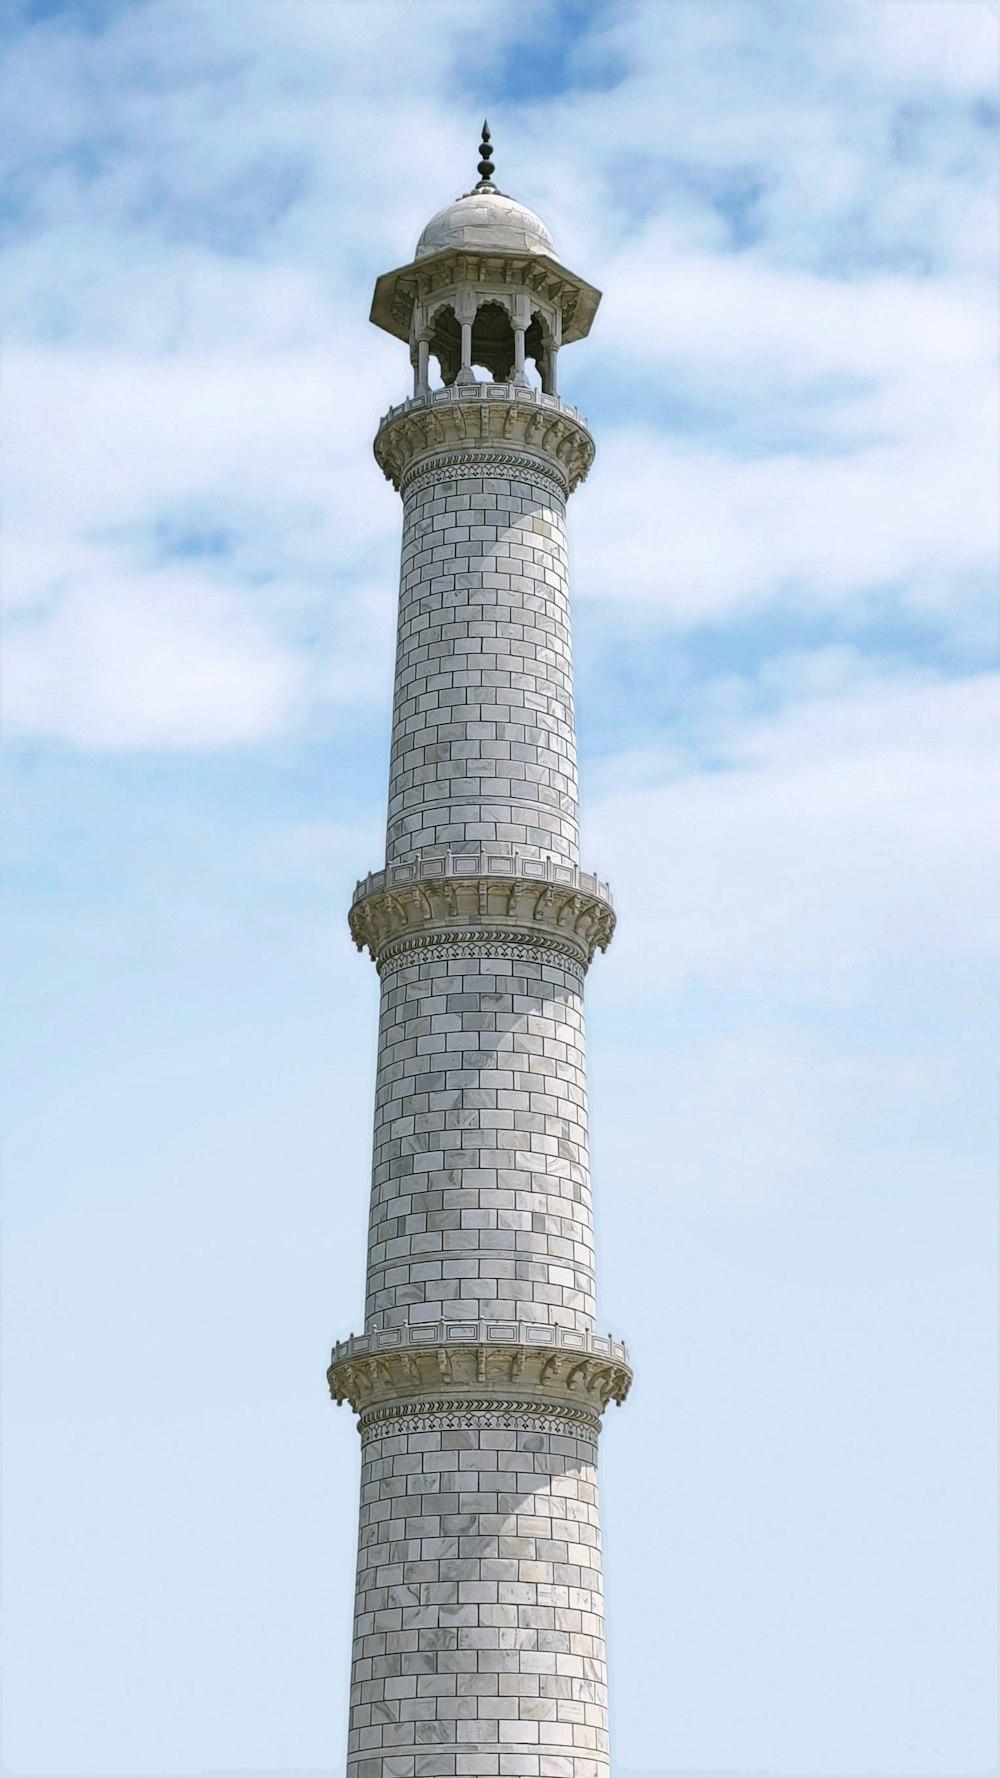 a tall white tower with a clock on top of it